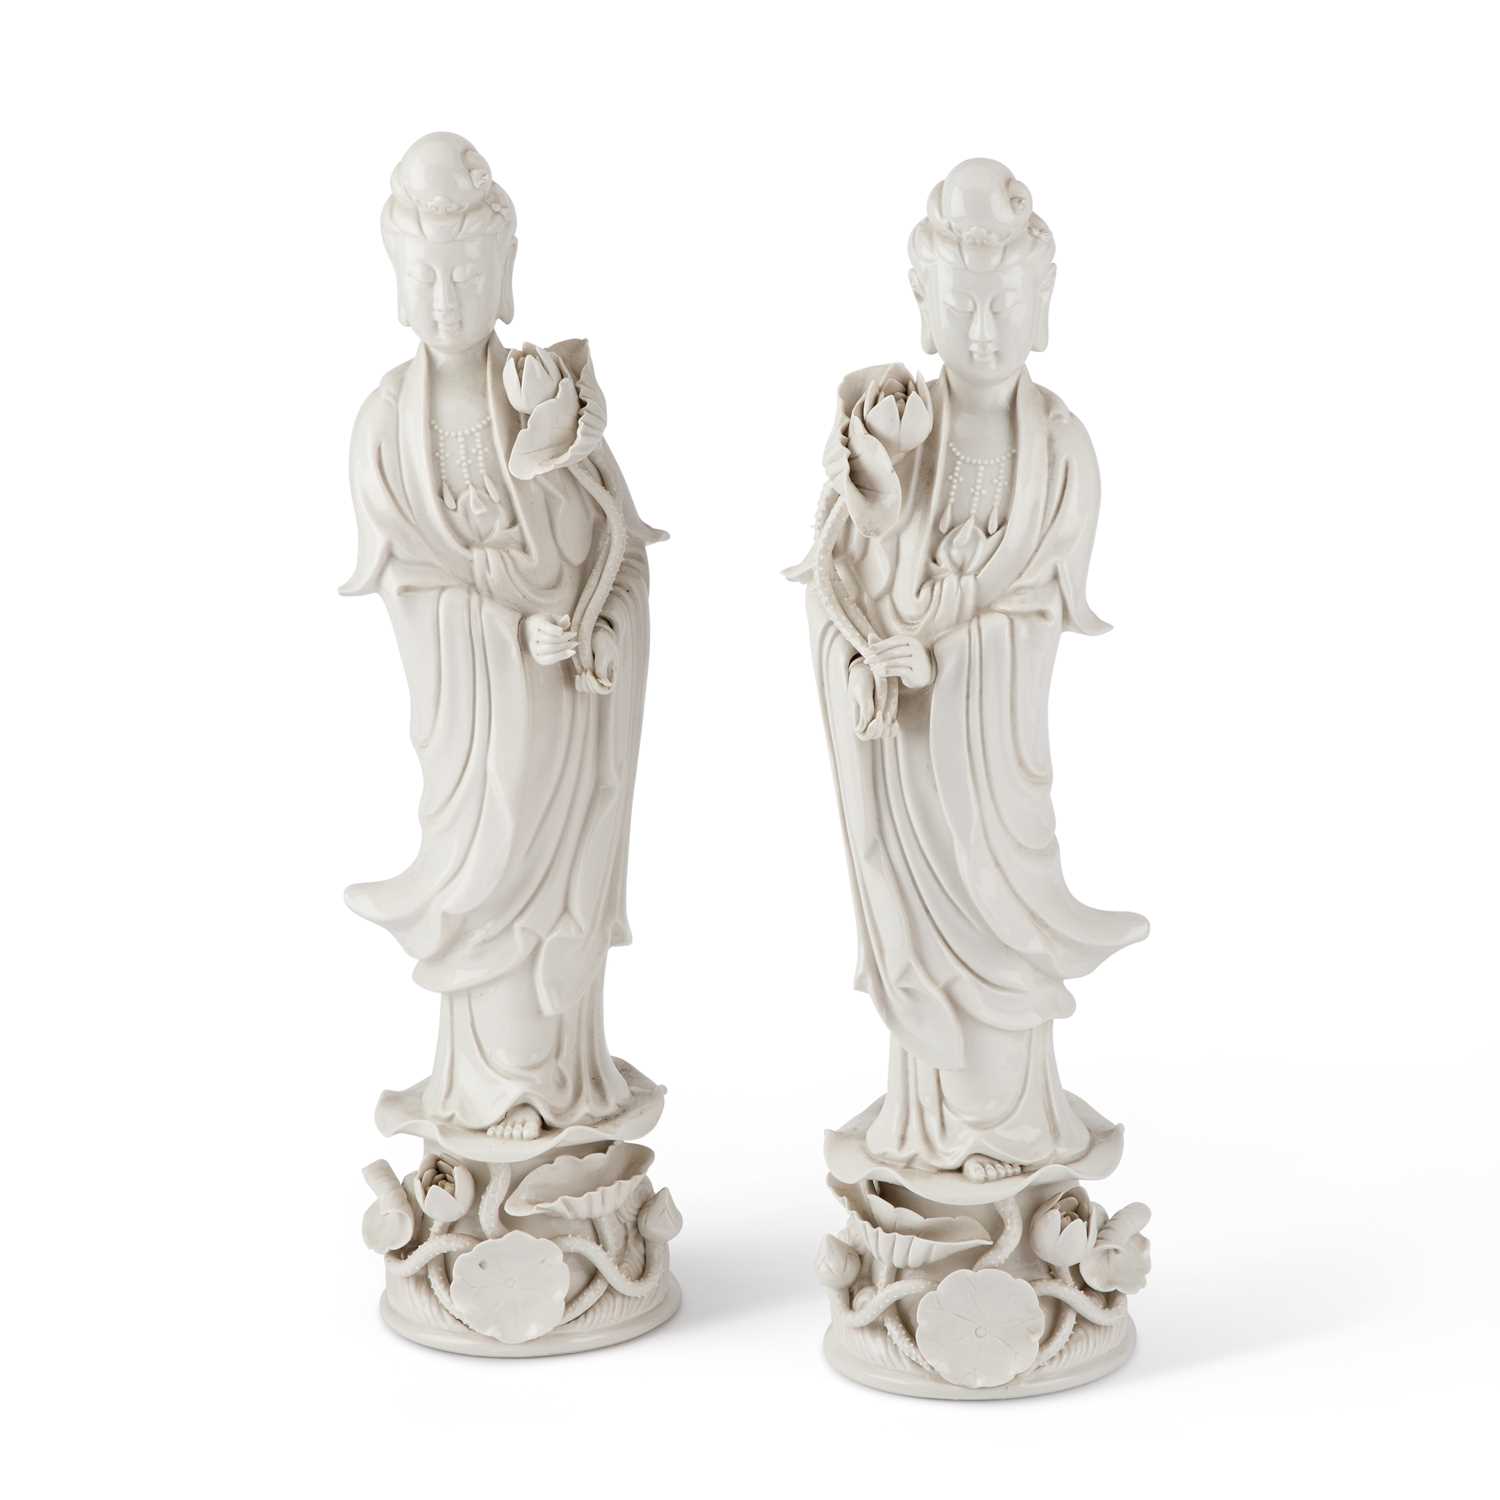 A LARGE PAIR OF CHINESE BLANC-DE-CHINE FIGURES OF GUANYIN